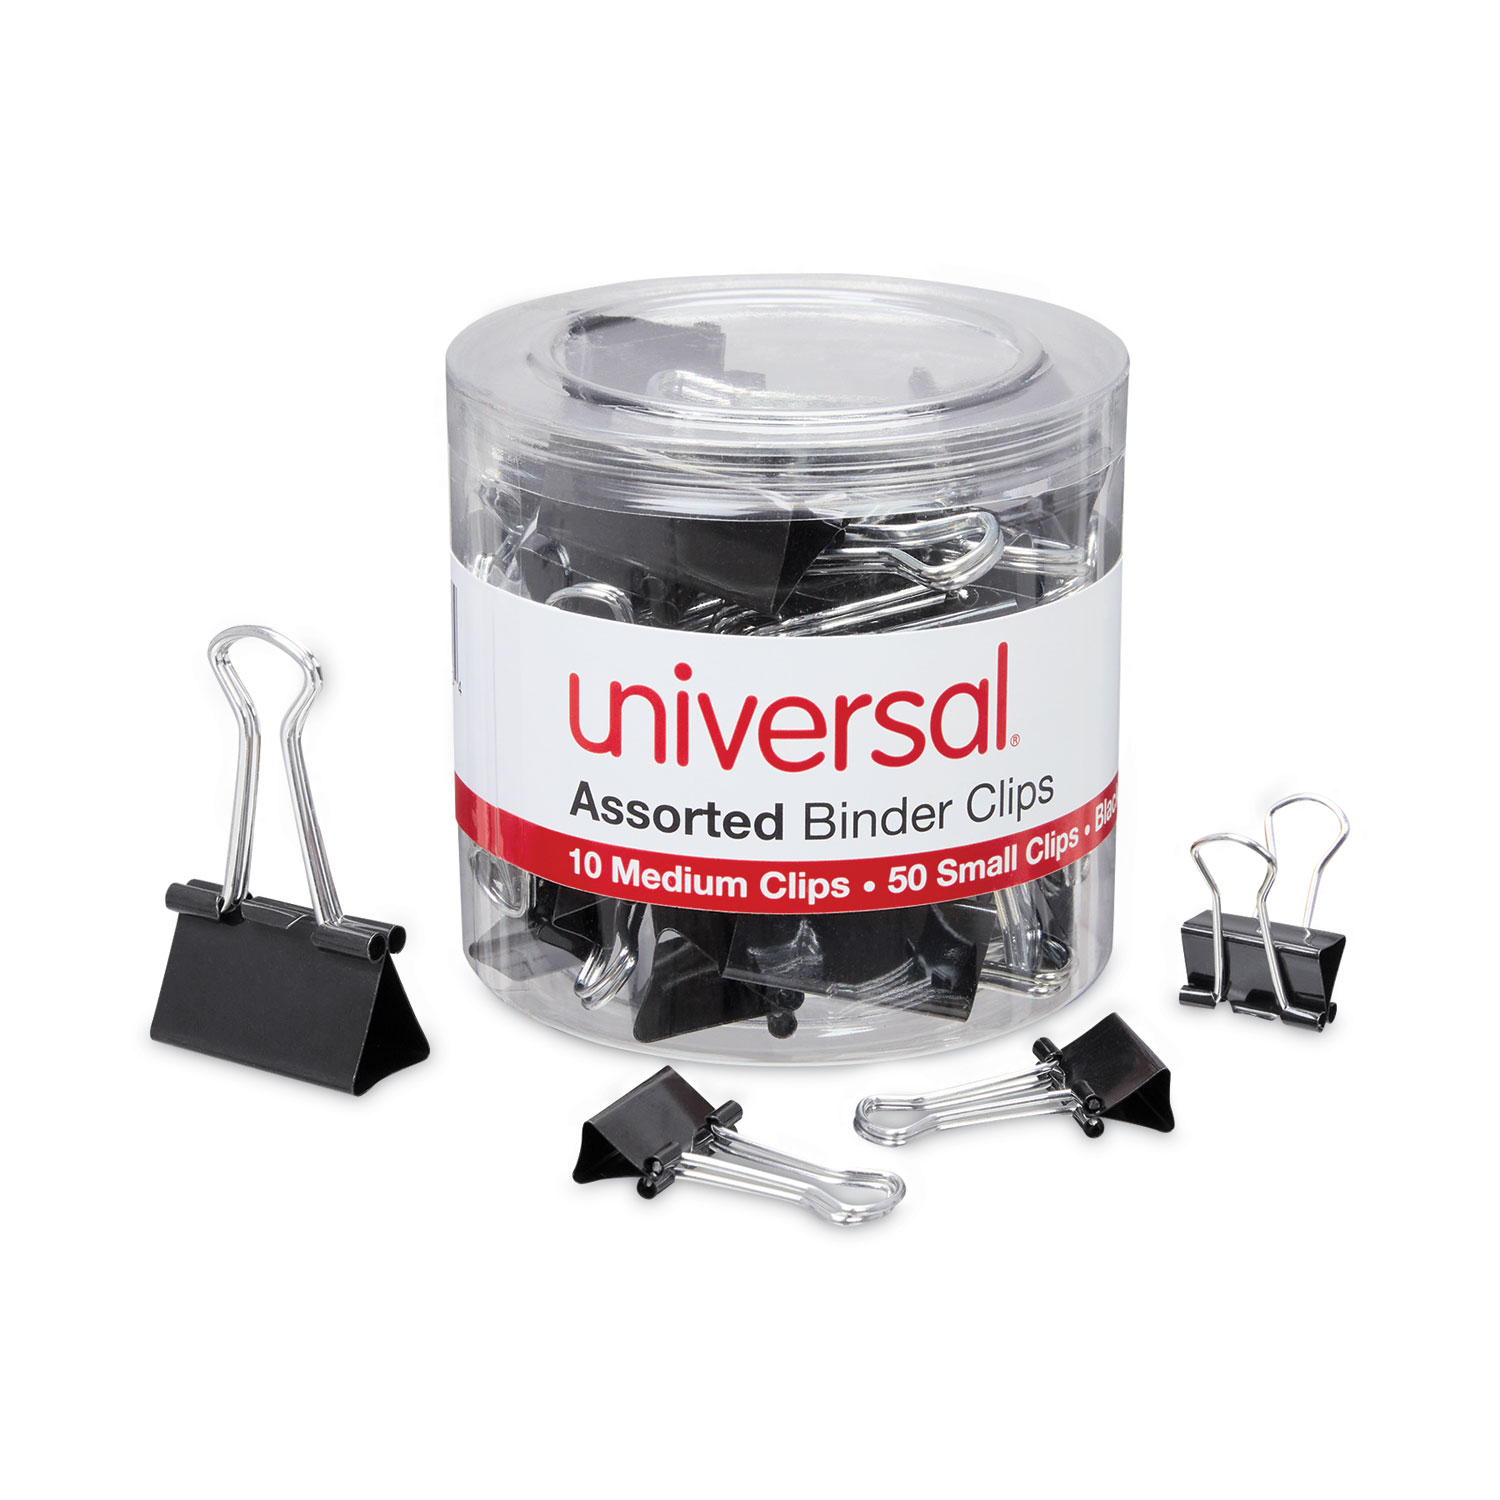 Universal Binder Clips In Dispenser Tub 60/Pack Assorted Sizes Black/Silver 